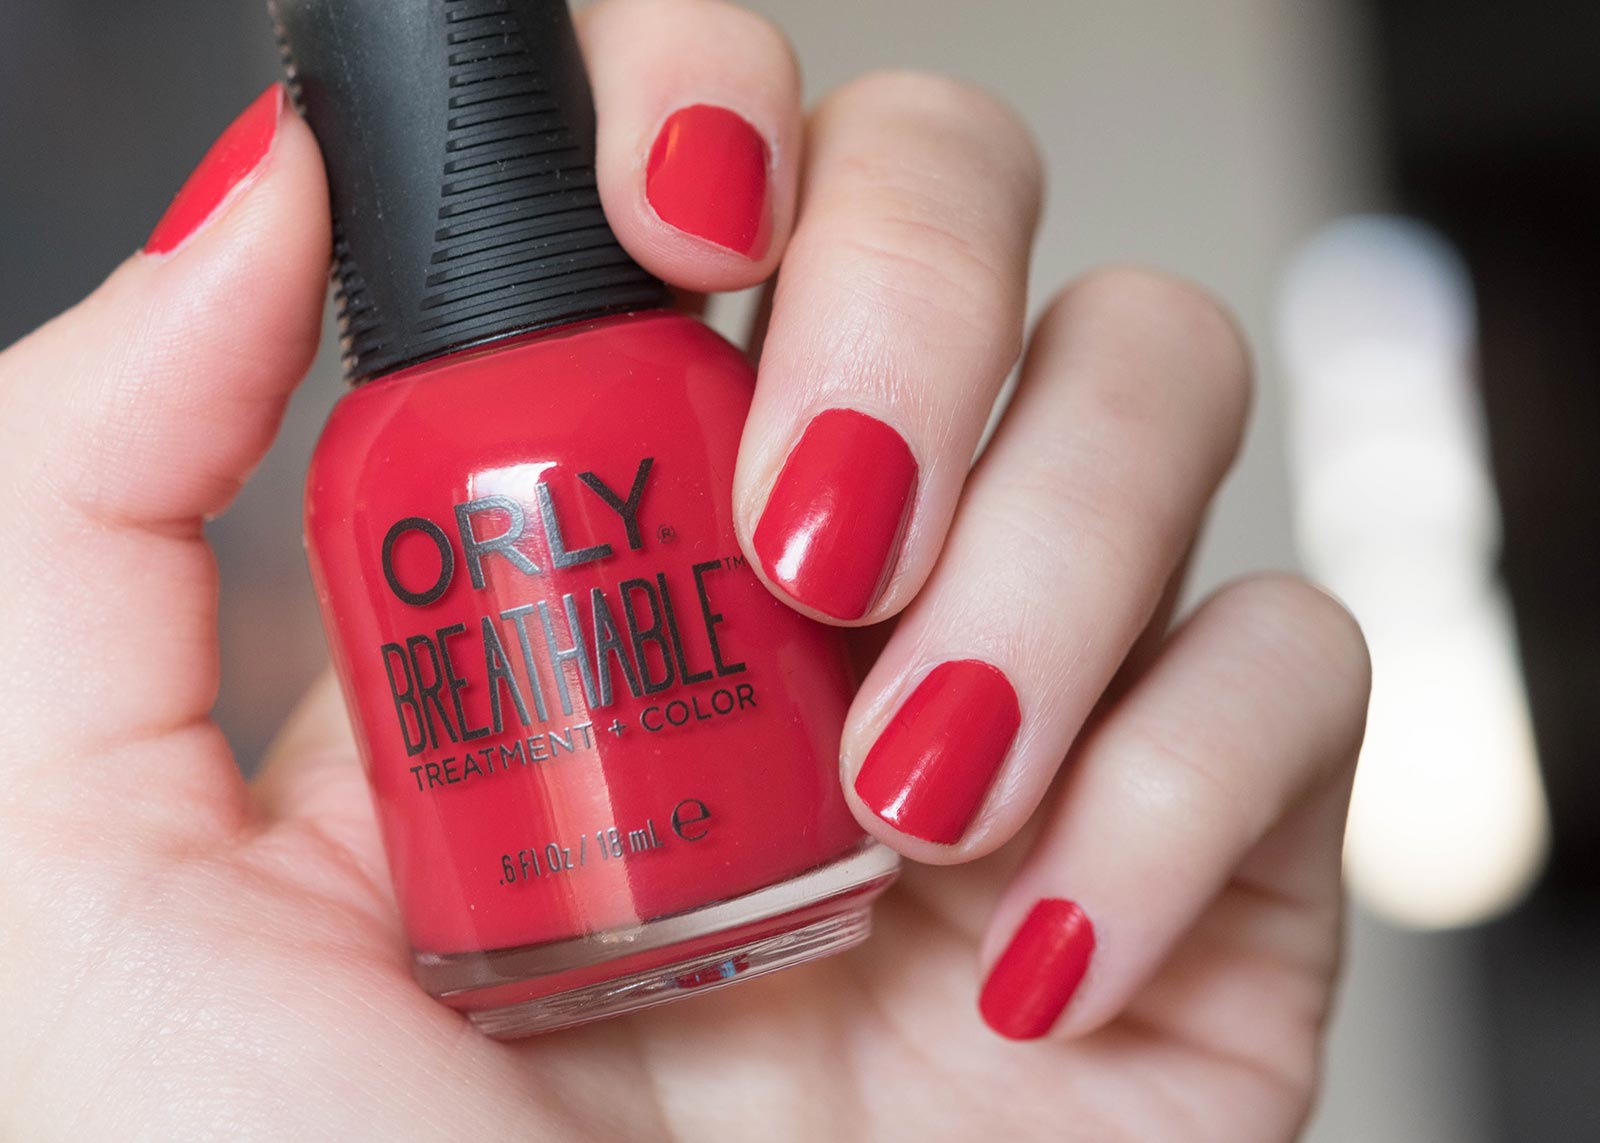 9. Orly Breathable Treatment + Color in "Love My Nails" - wide 11